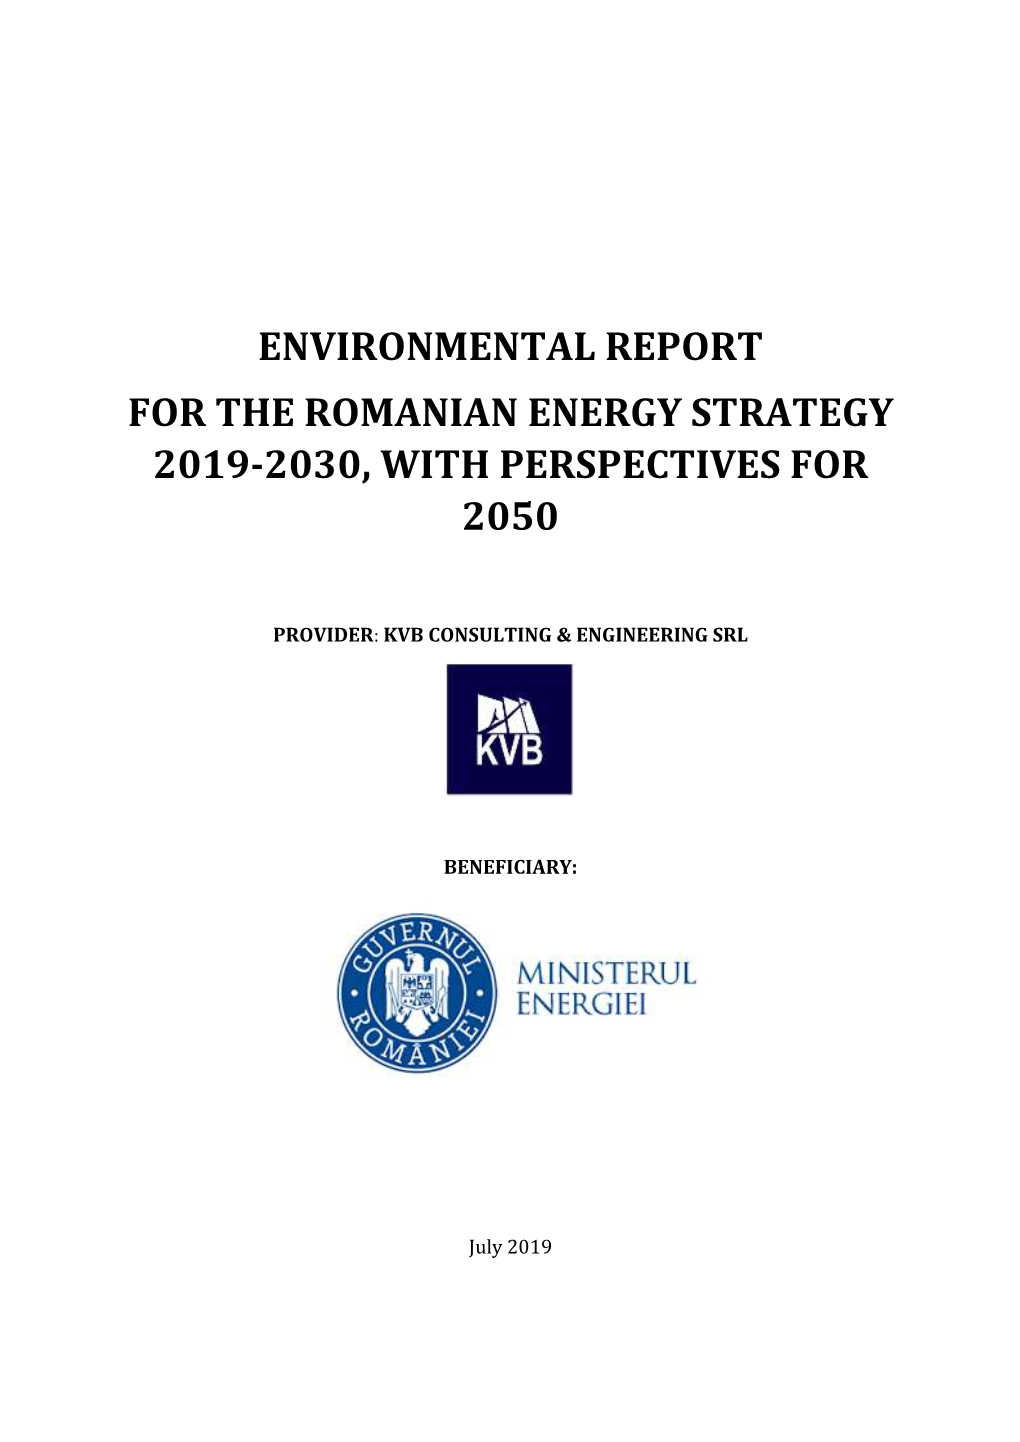 Environmental Report for the Romanian Energy Strategy 2019-2030, with Perspectives for 2050